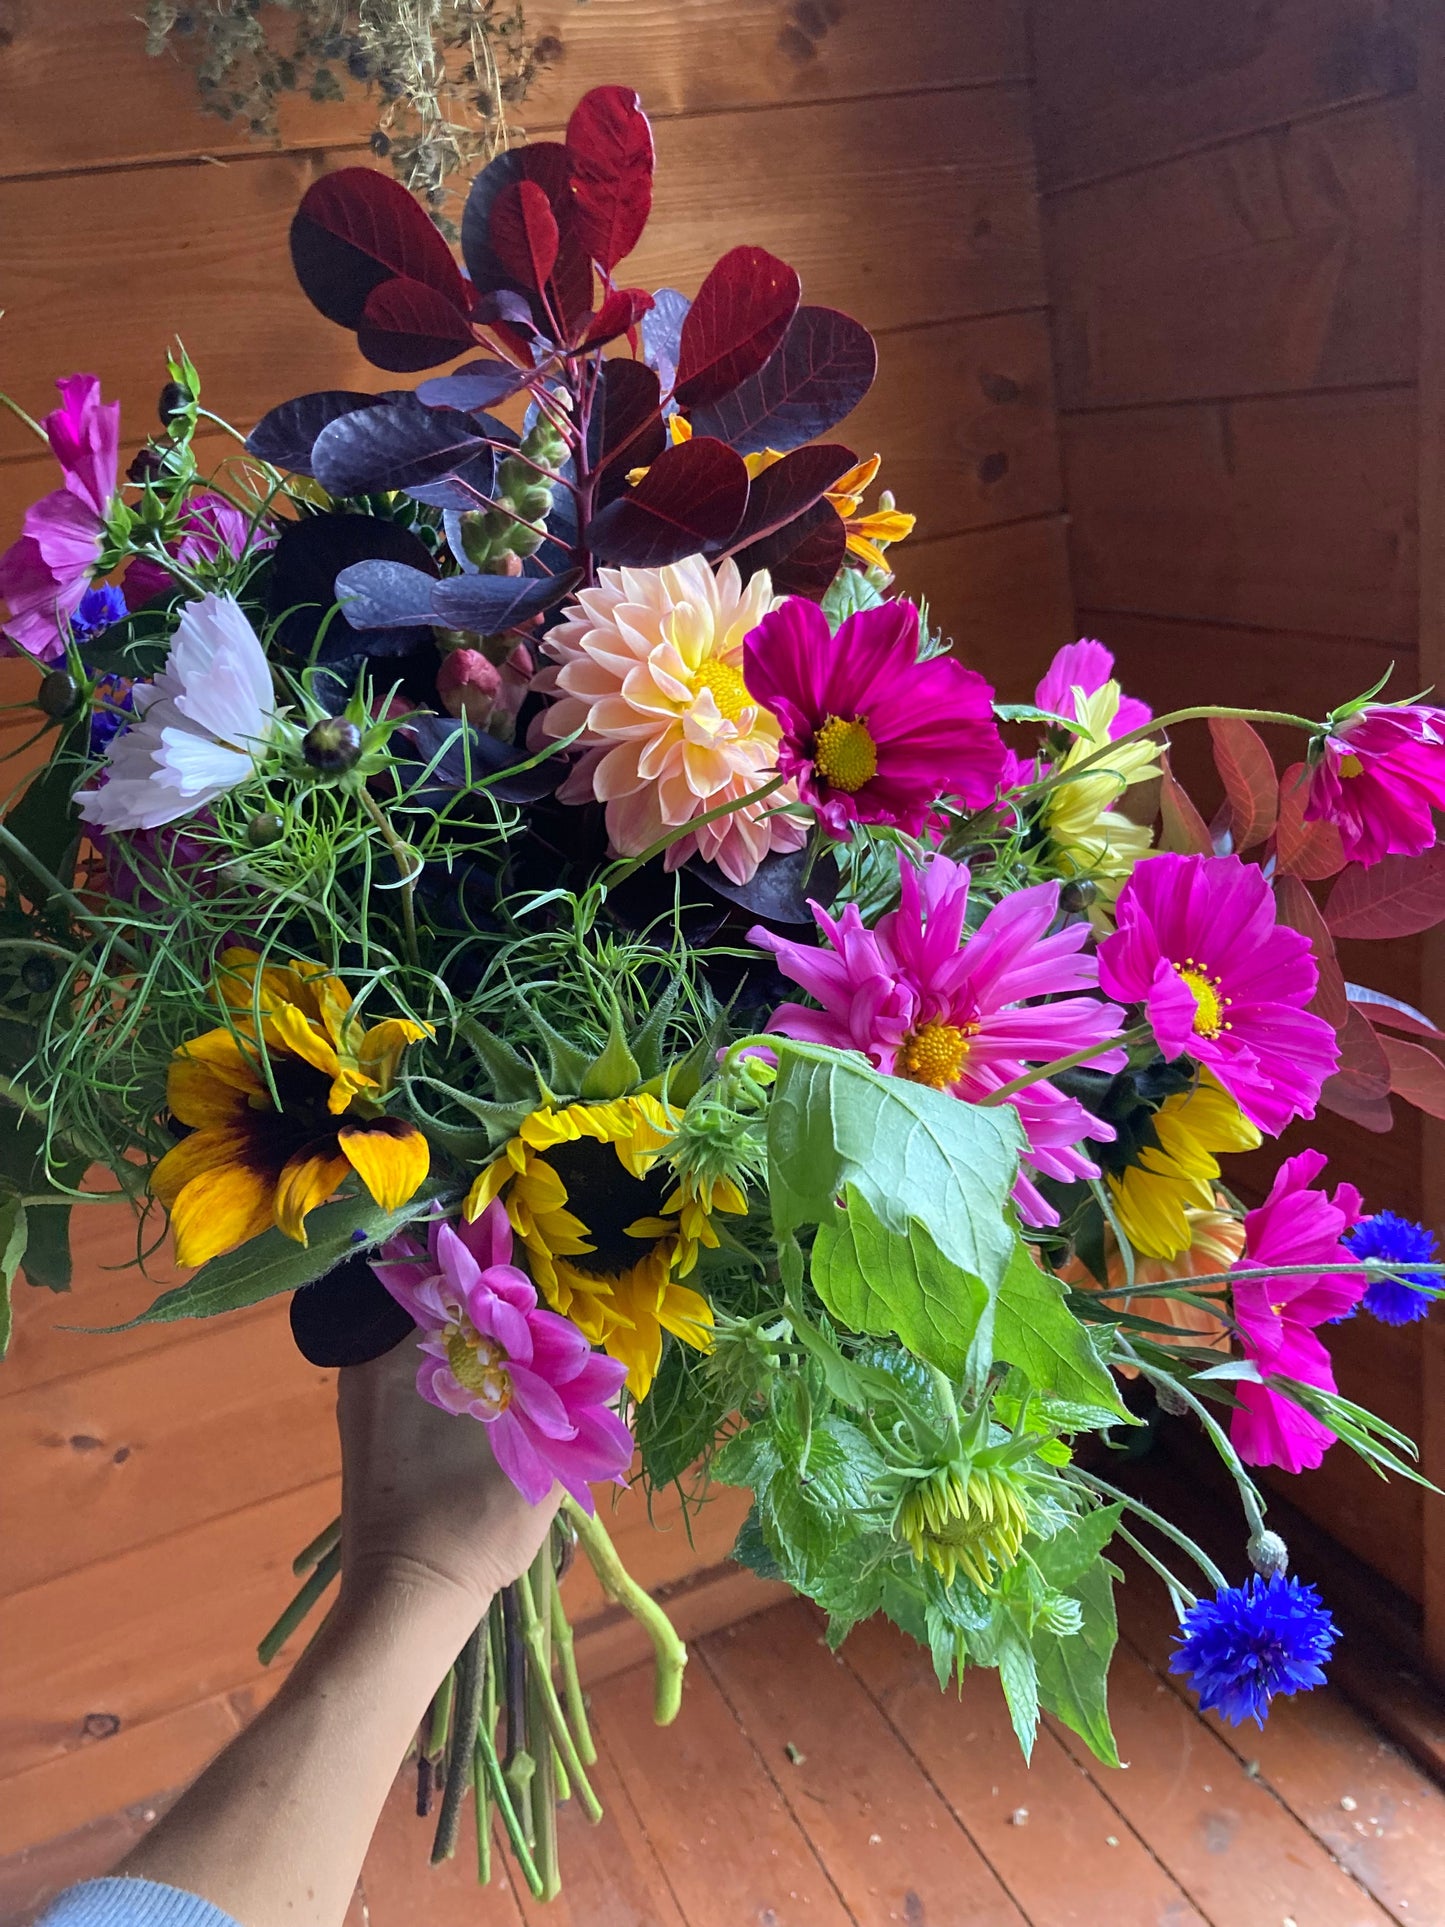 Monthly flower subscription - 4 months